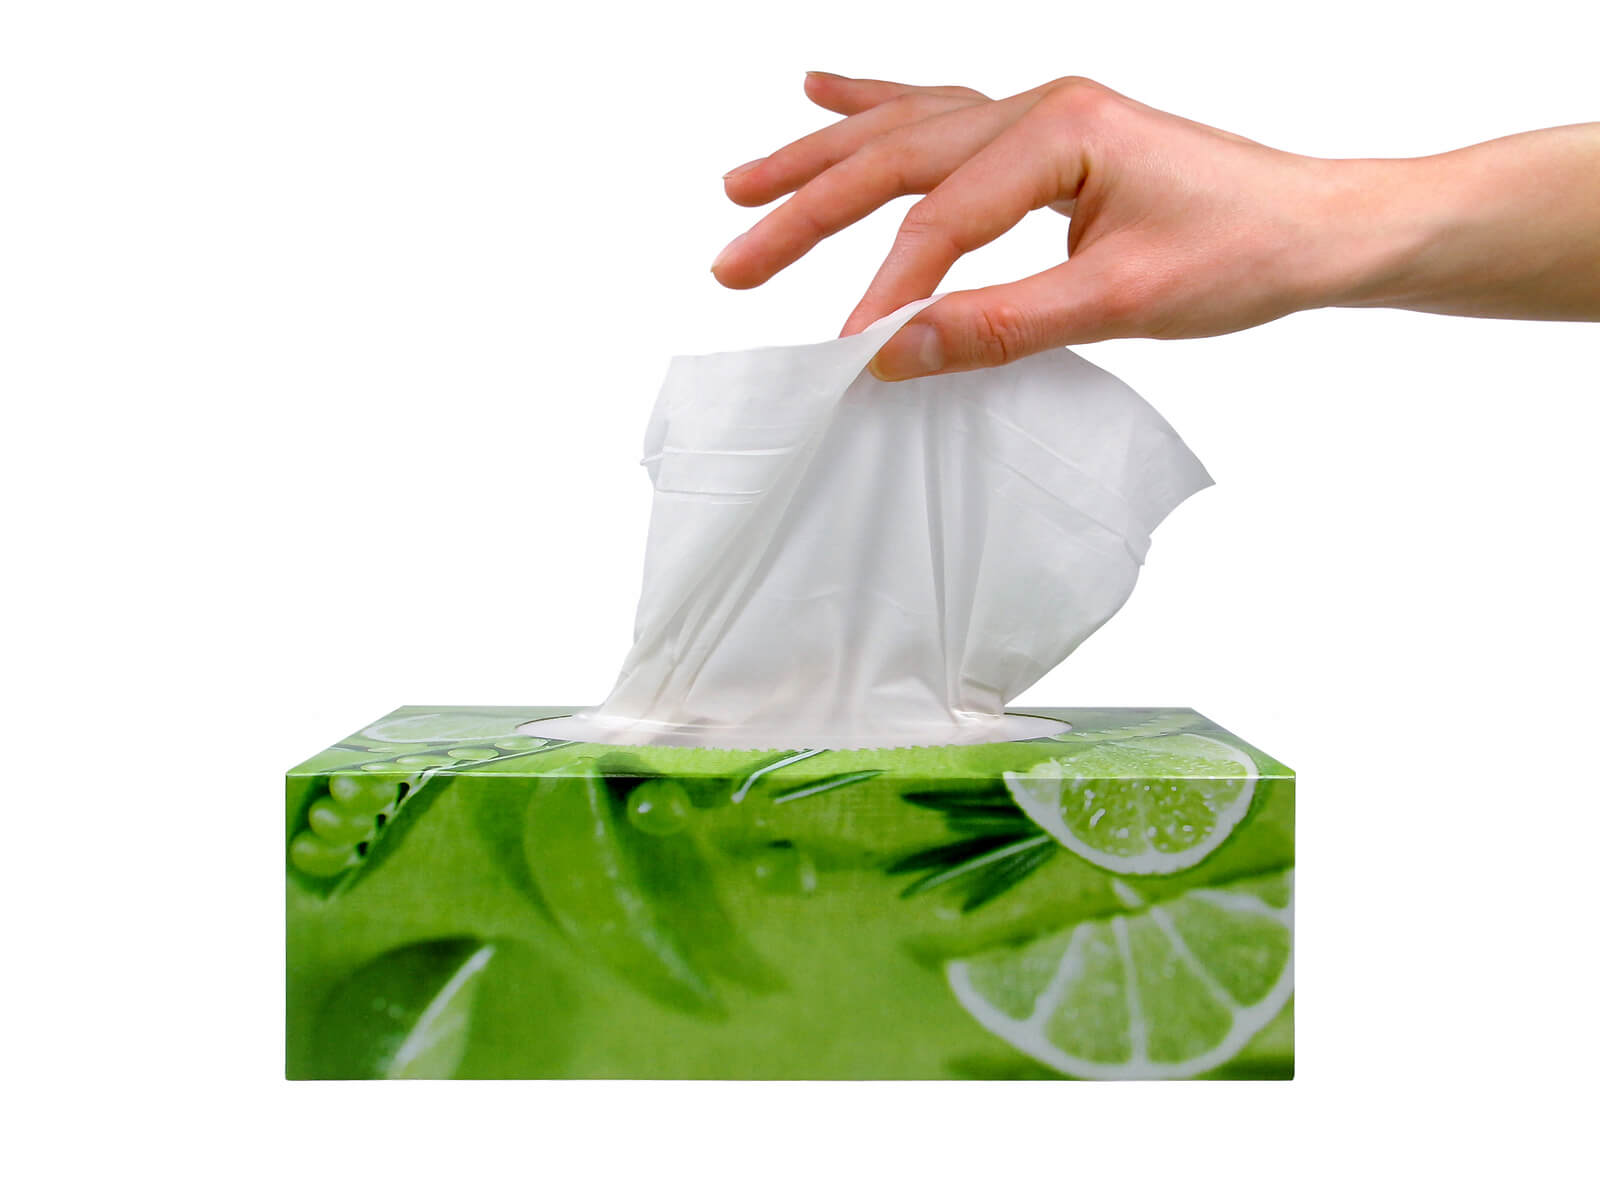 A female hand grabbing a tissue from a green tissue box, against a white background.